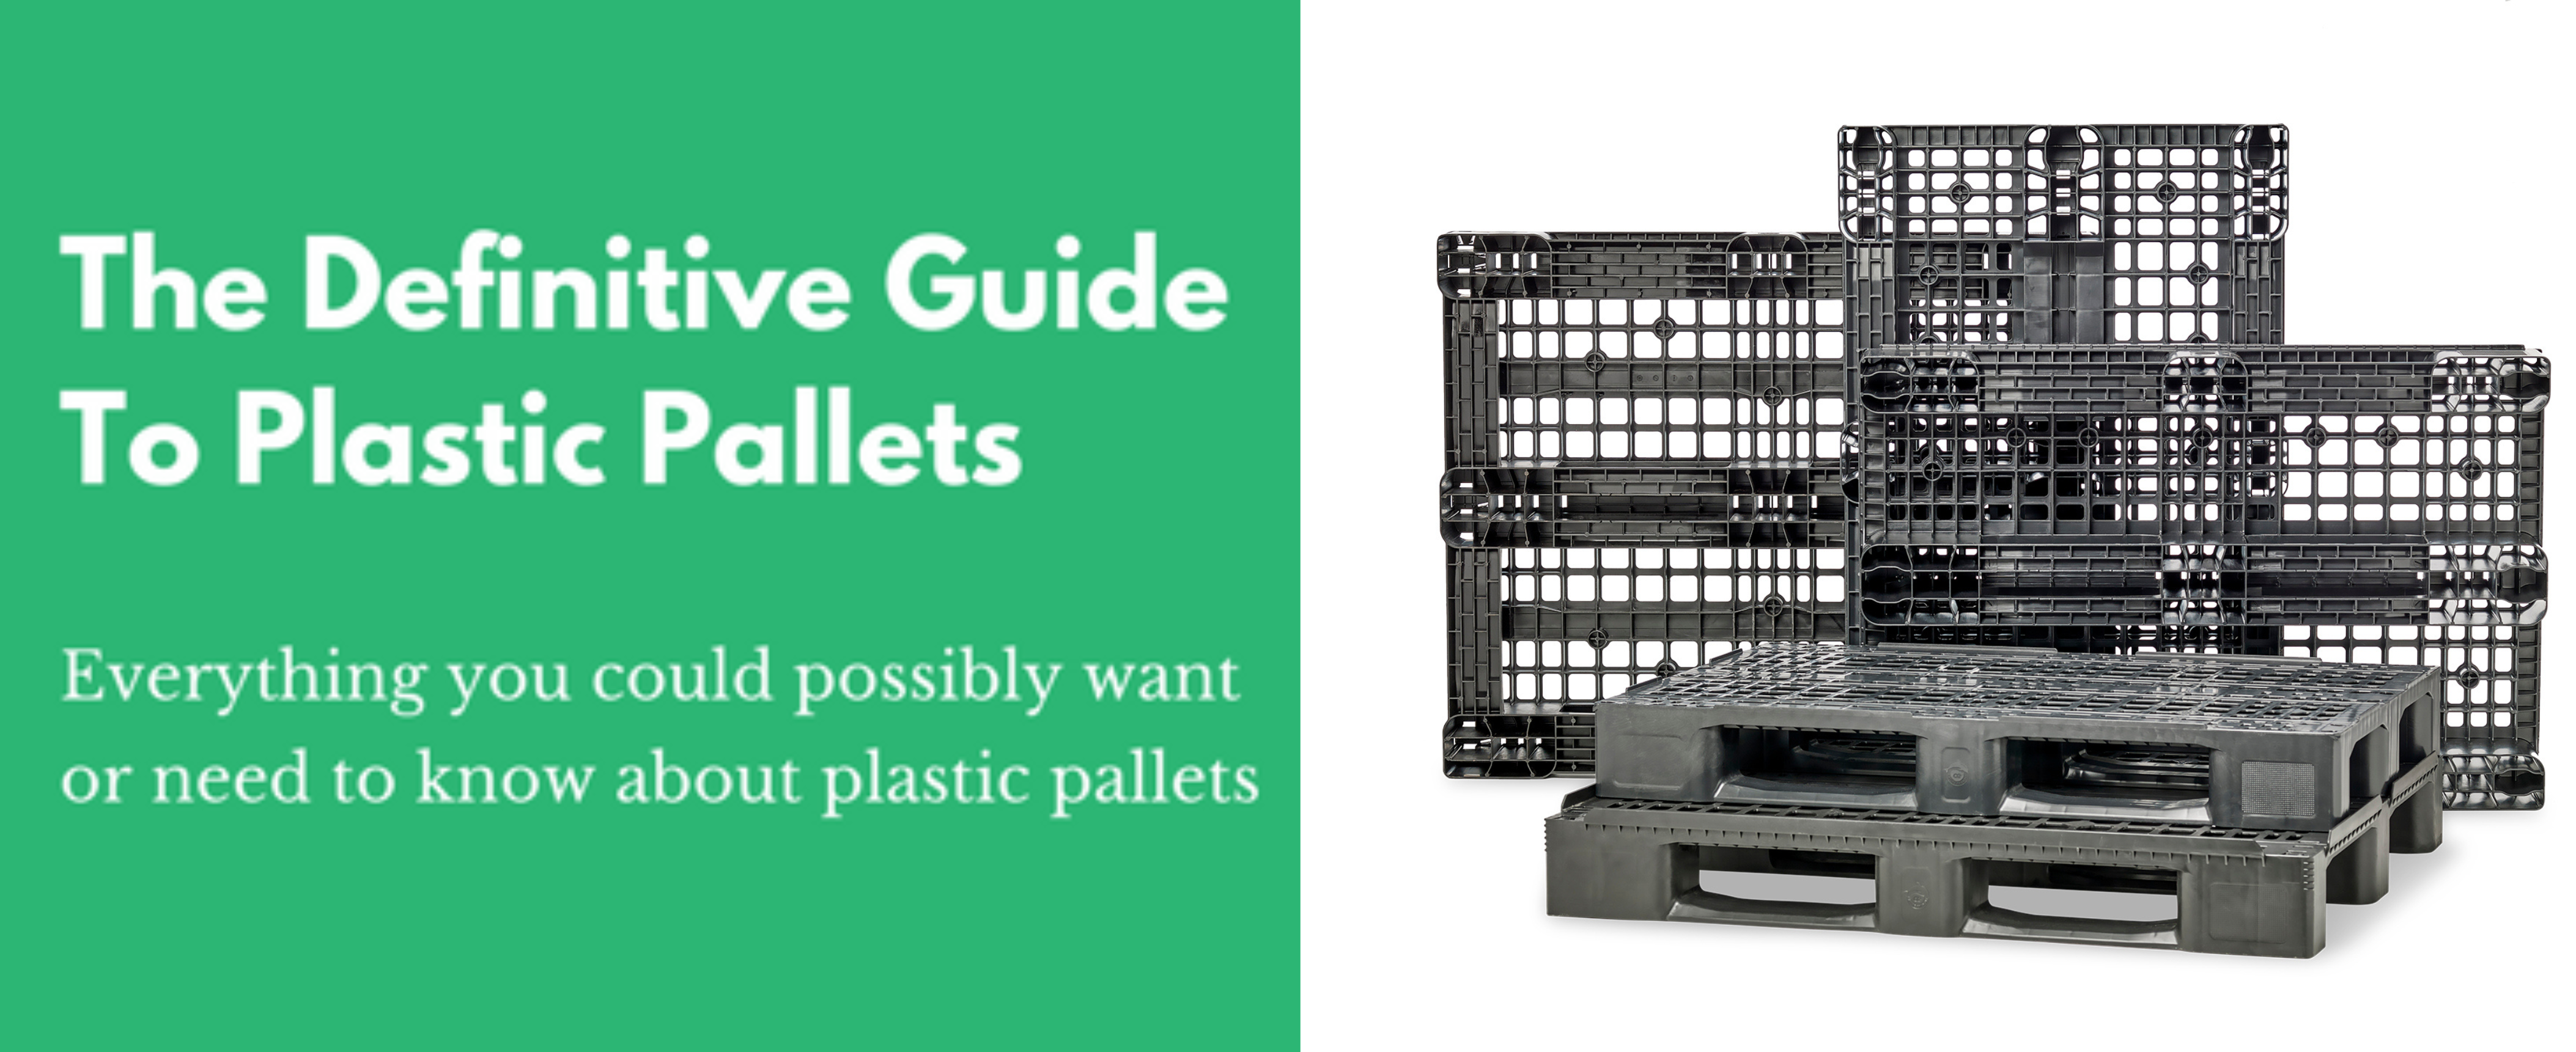 The Ultimate Guide To Plastic Pallets